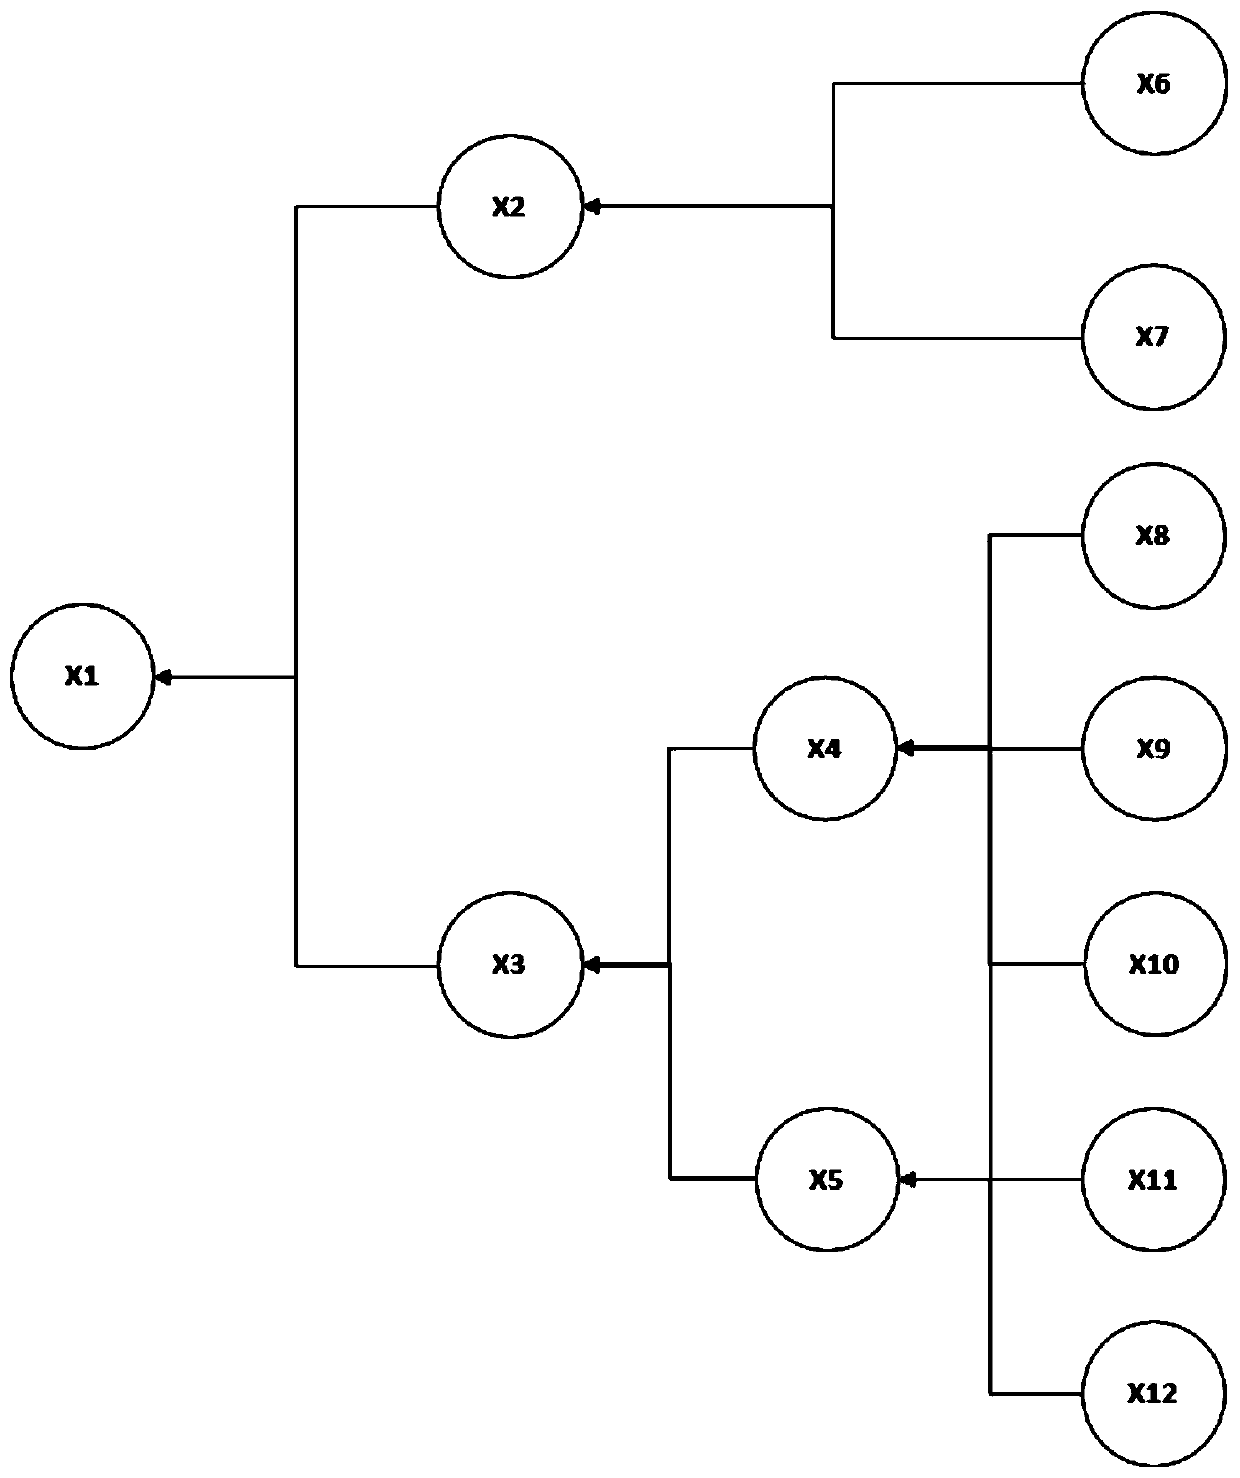 A fault prediction system and method based on a Bayesian belief network